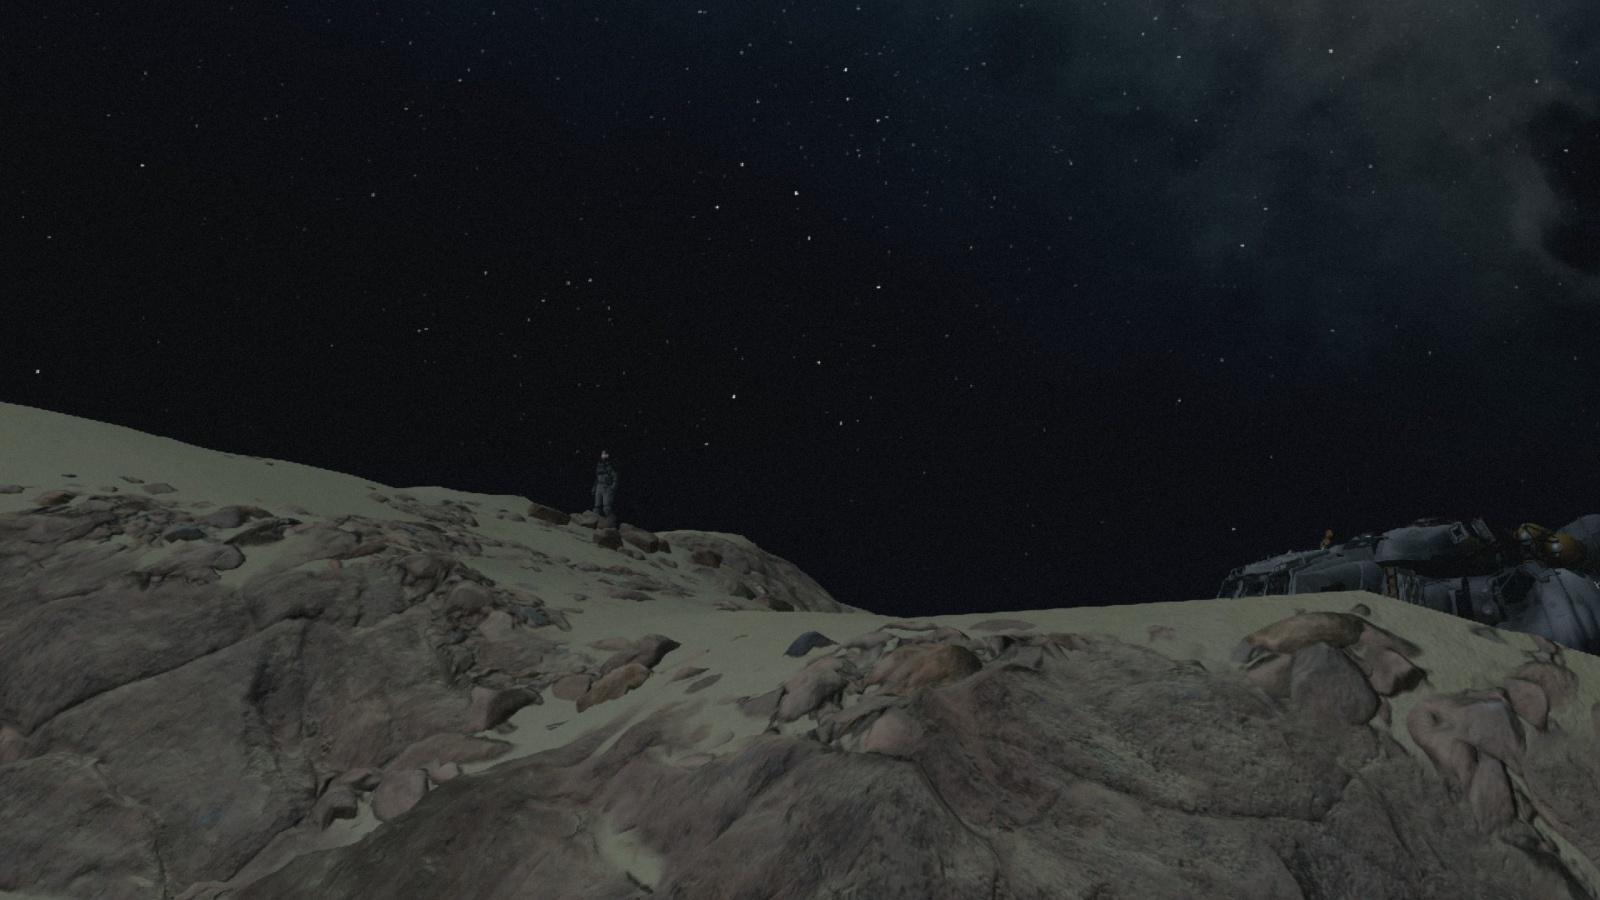 A screenshot from the game Starfield